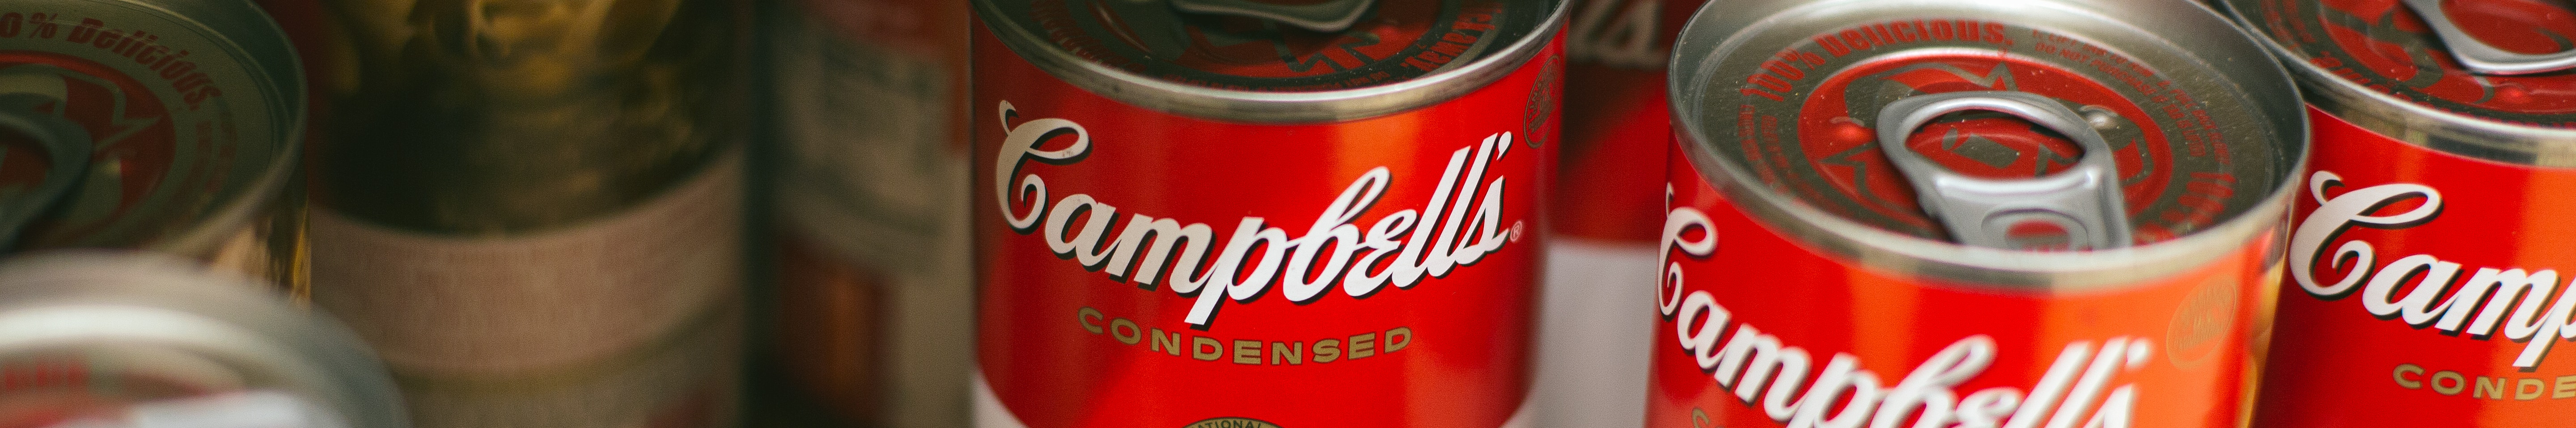 Campbell “promotes circularity” yet continues to supply single-use packaging